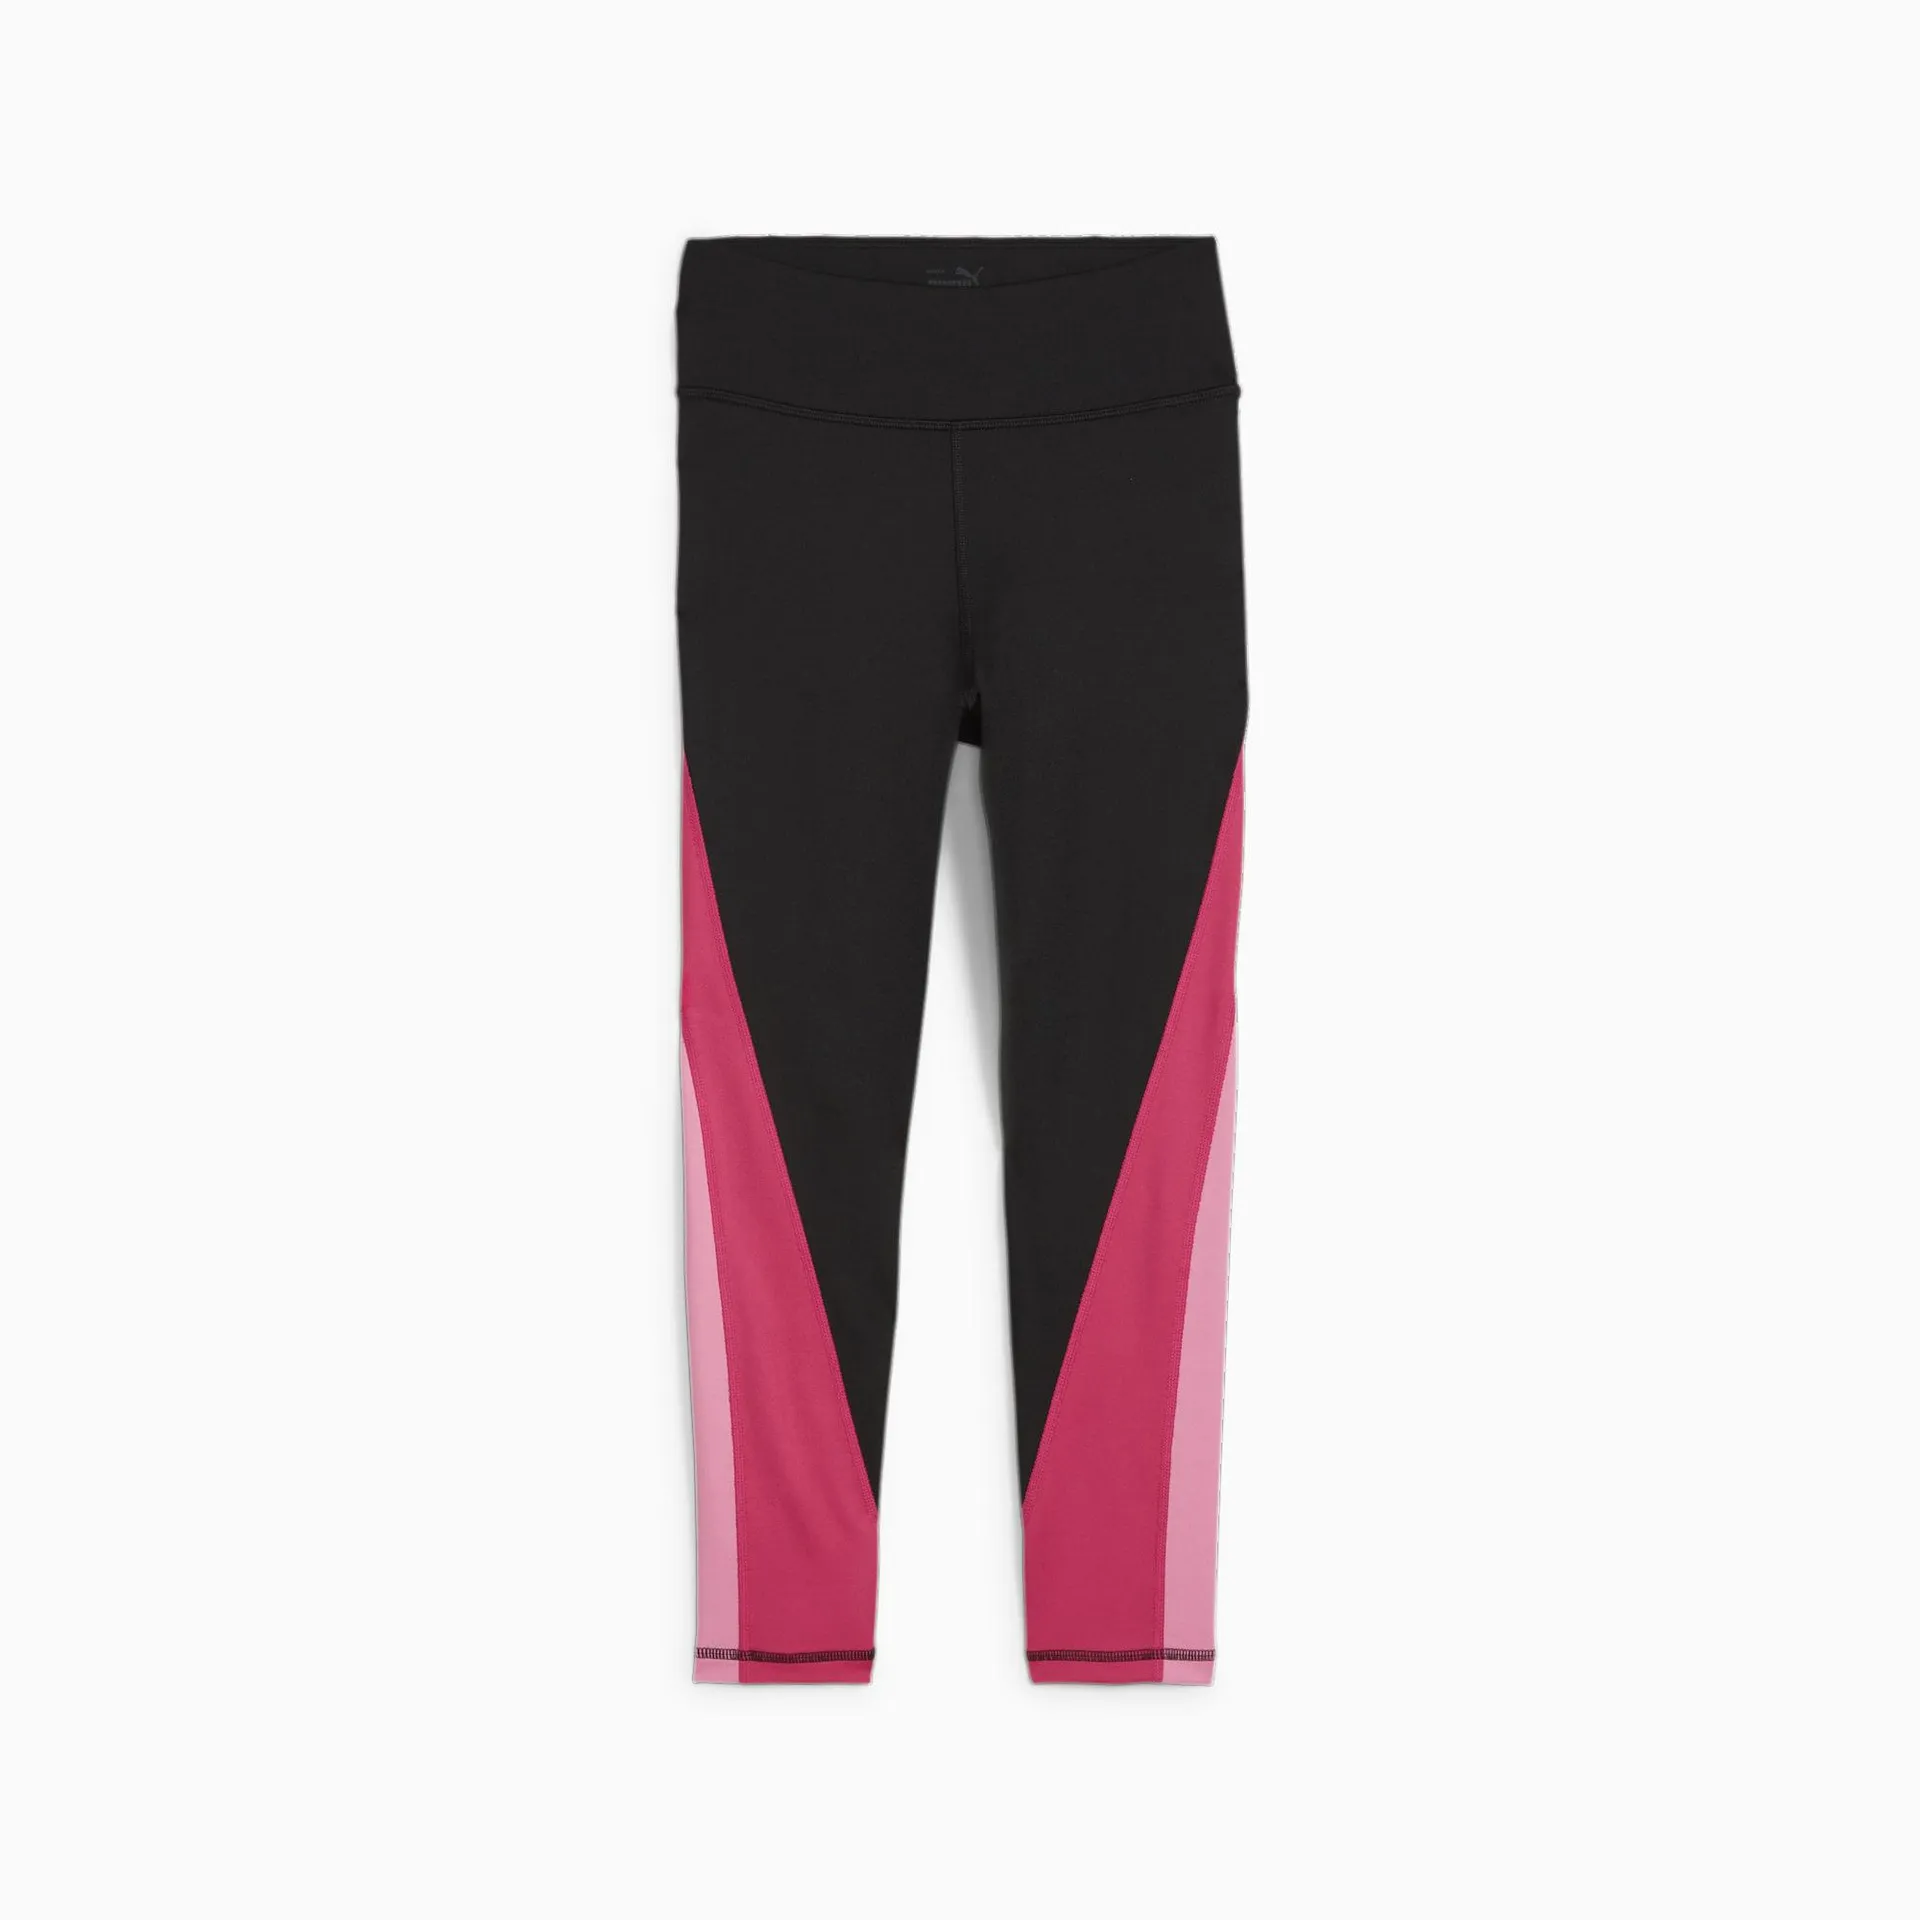 PUMA FIT 7/8 Tights - Youth 8-16 years